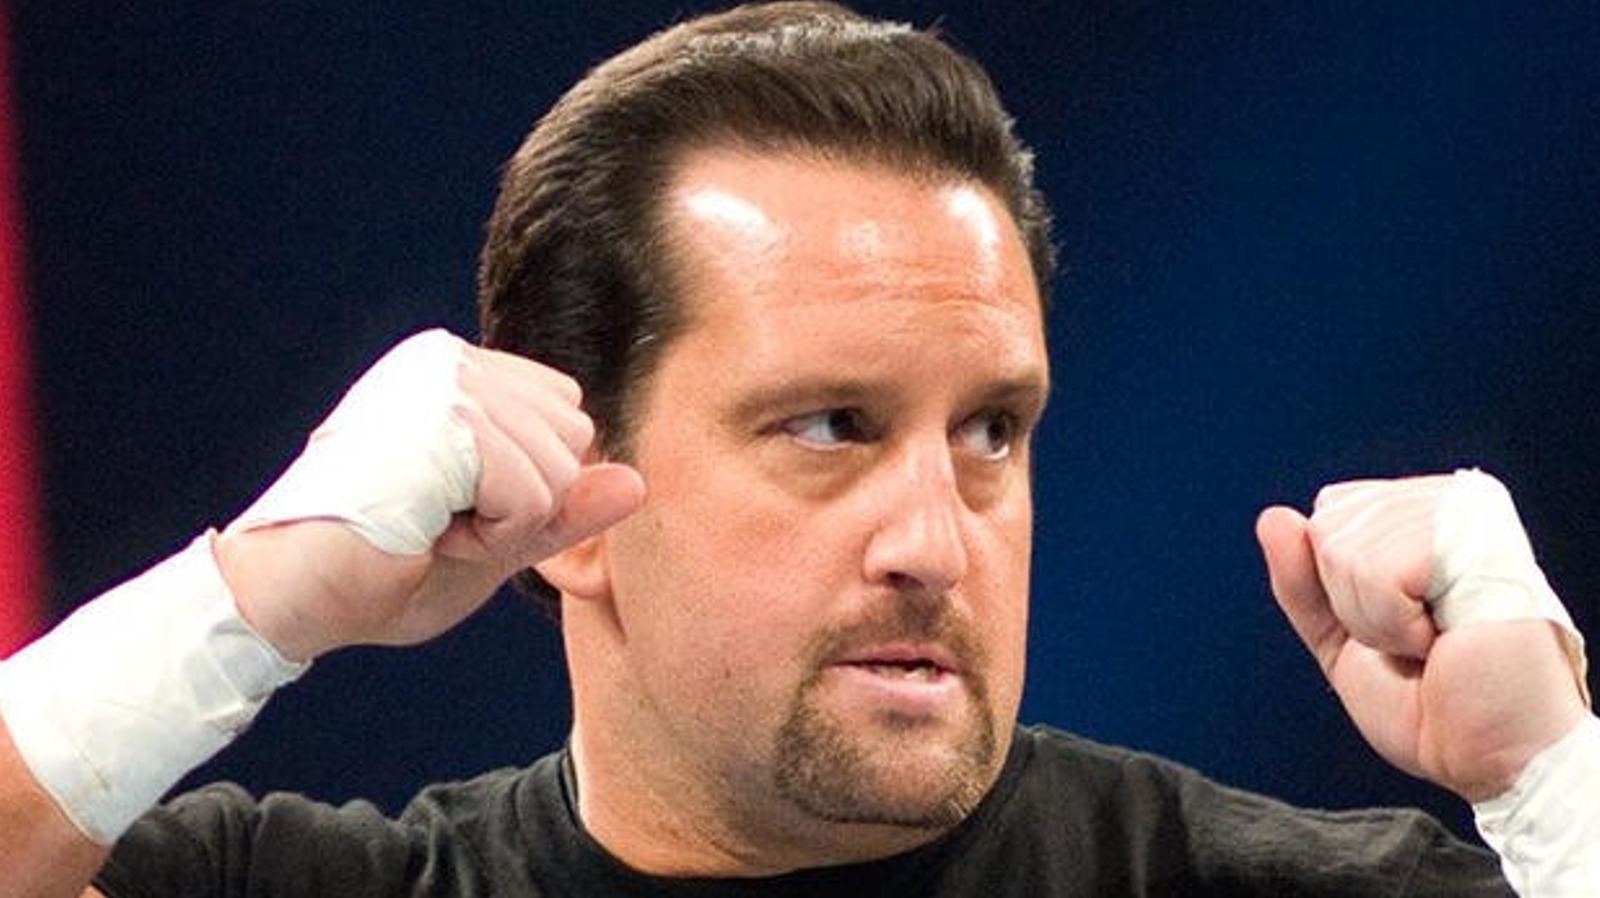 Tommy Dreamer On Potential WWE HOF Induction: 'Any Hall Of Fame Is An Honor'